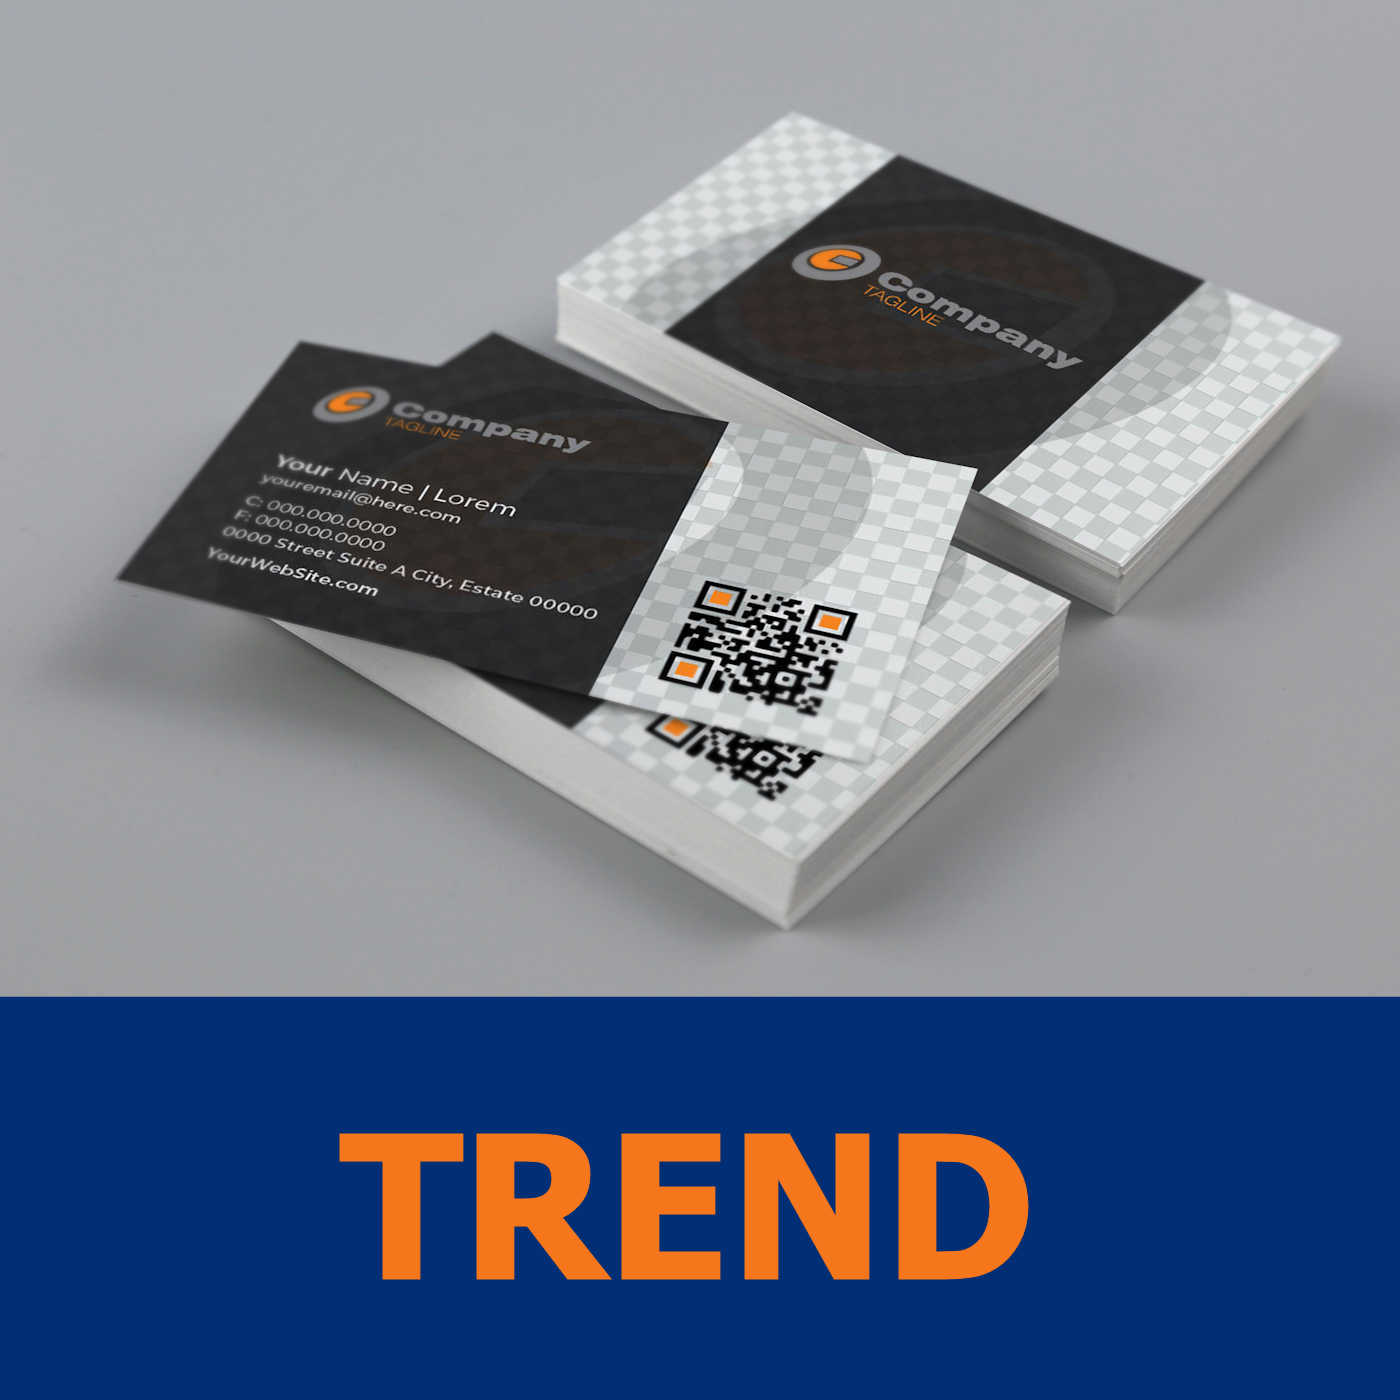 AVS Rize - Business Card Trend Style - LG